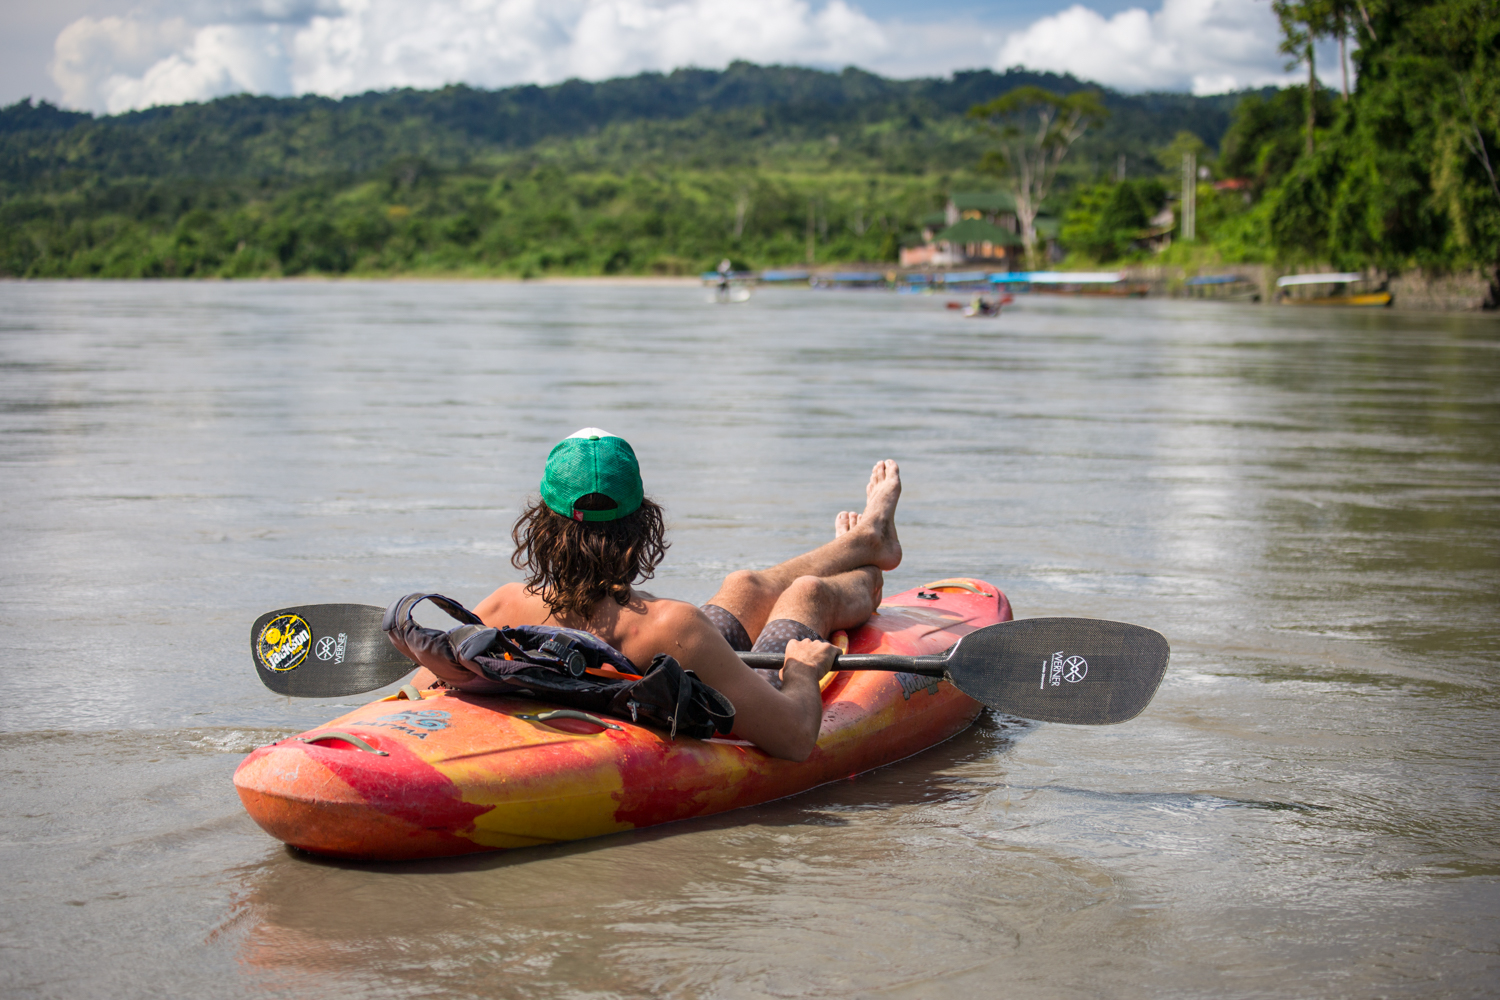 A paddleboarder looks down the Madre de Dios river in Peru at a group of others in the distance